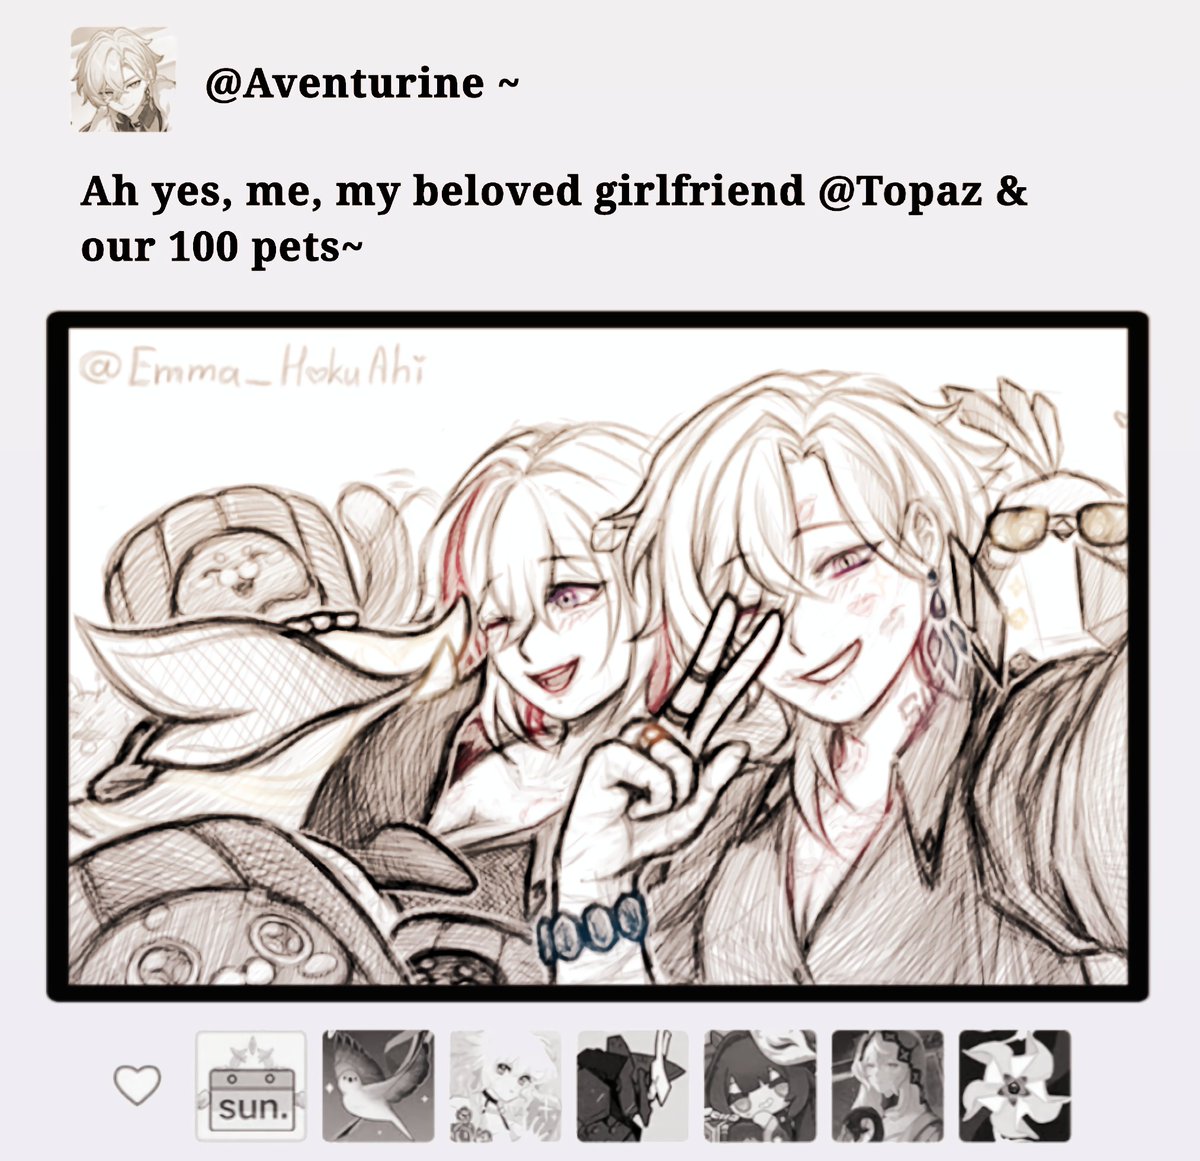 Ah, Aventurine posted a new photo, how exciting, let's see! 
Oh-???

#avenpaz #砂托 #aventurine #topaz #アベトパ #kavalena